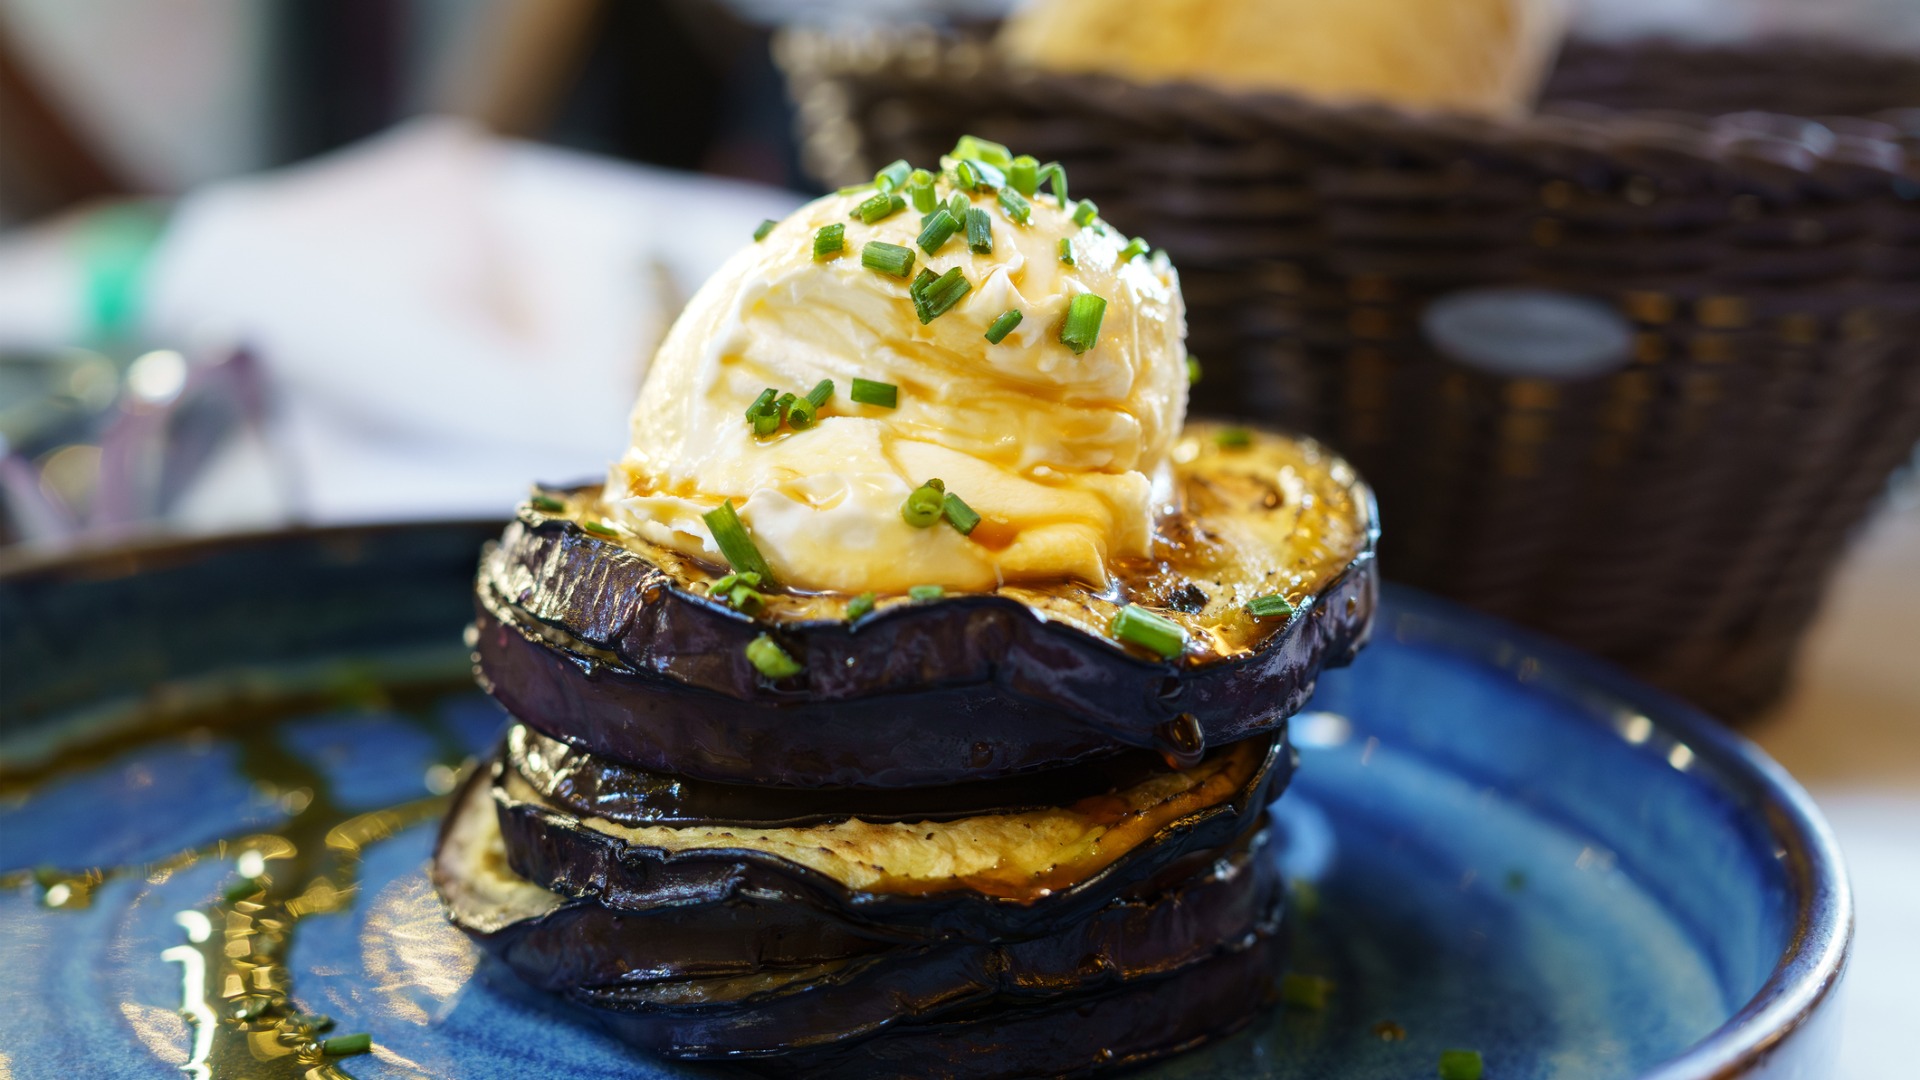 This image shows slices of eggplant with a cheese-based cream on top. 